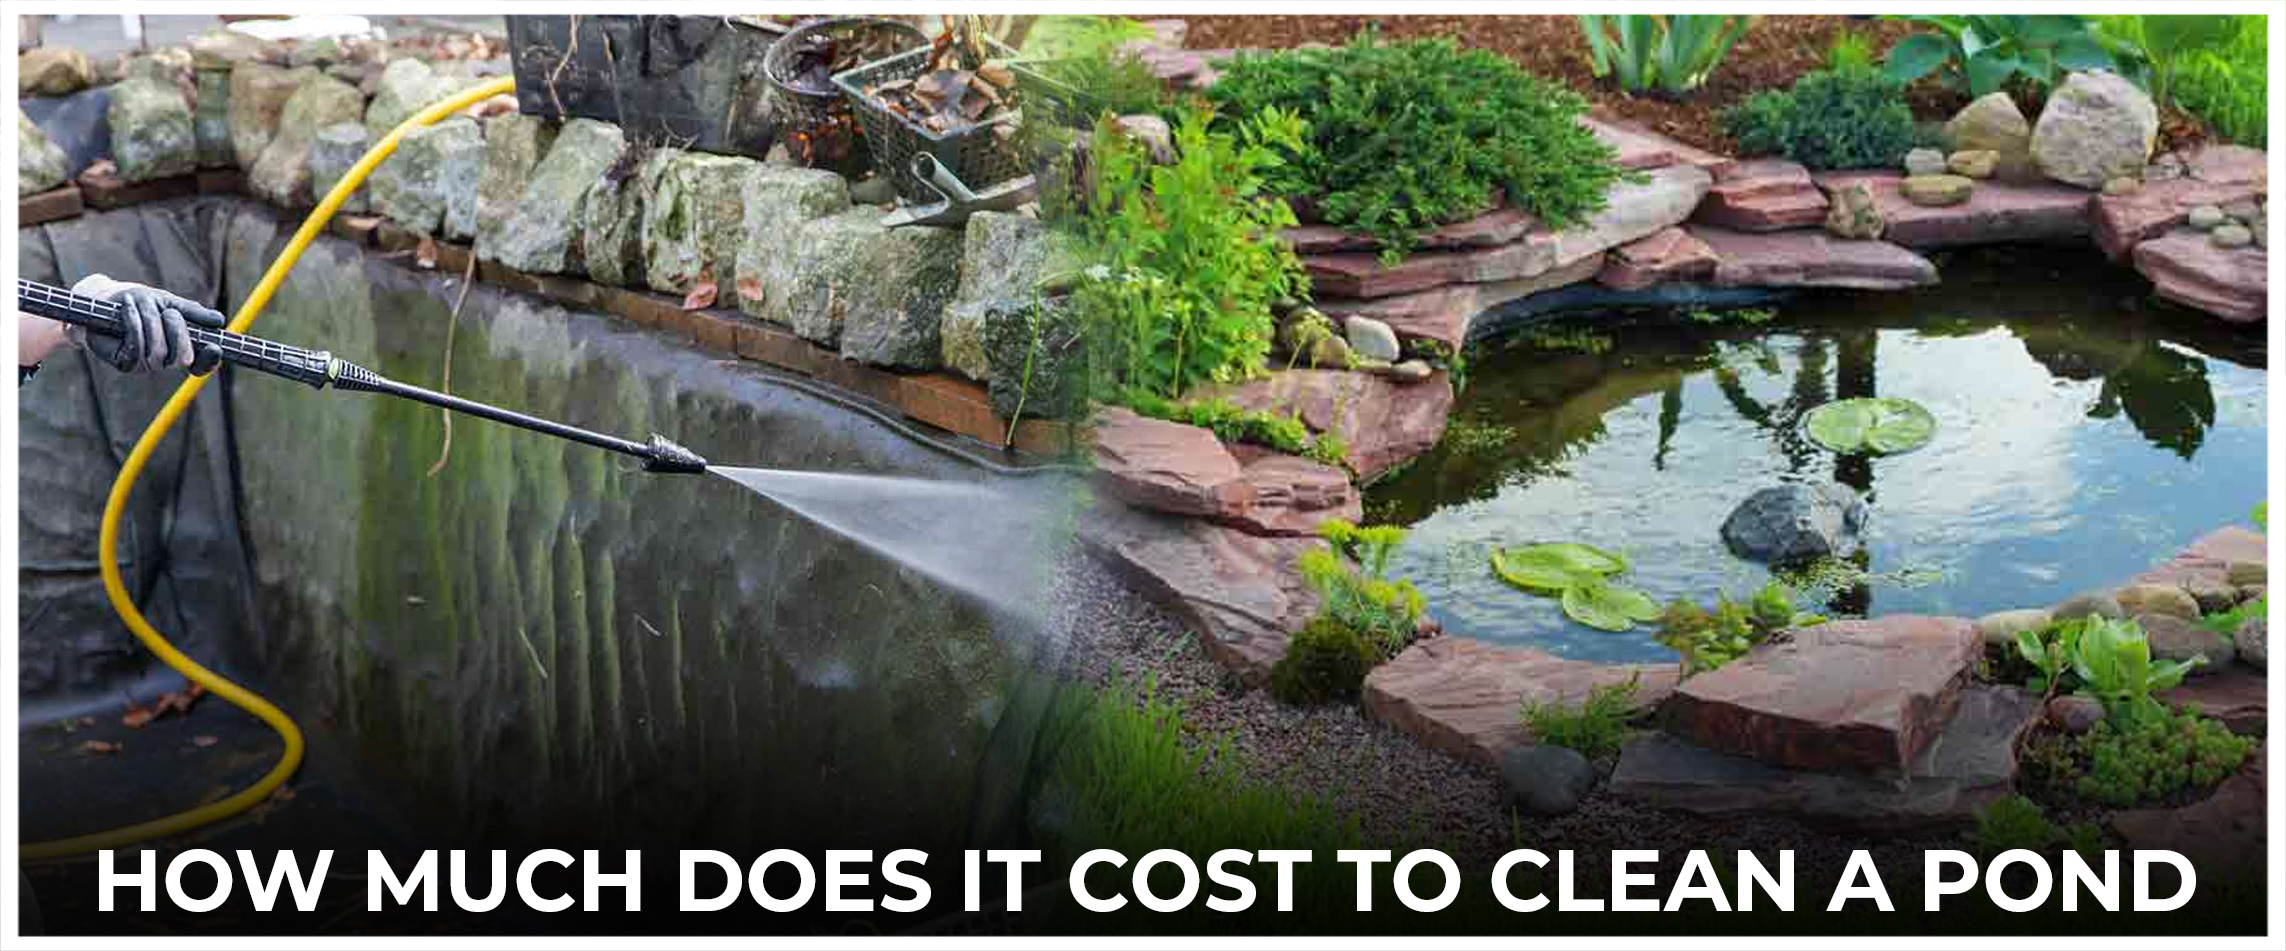 How Much Does It Cost To Clean A Pond